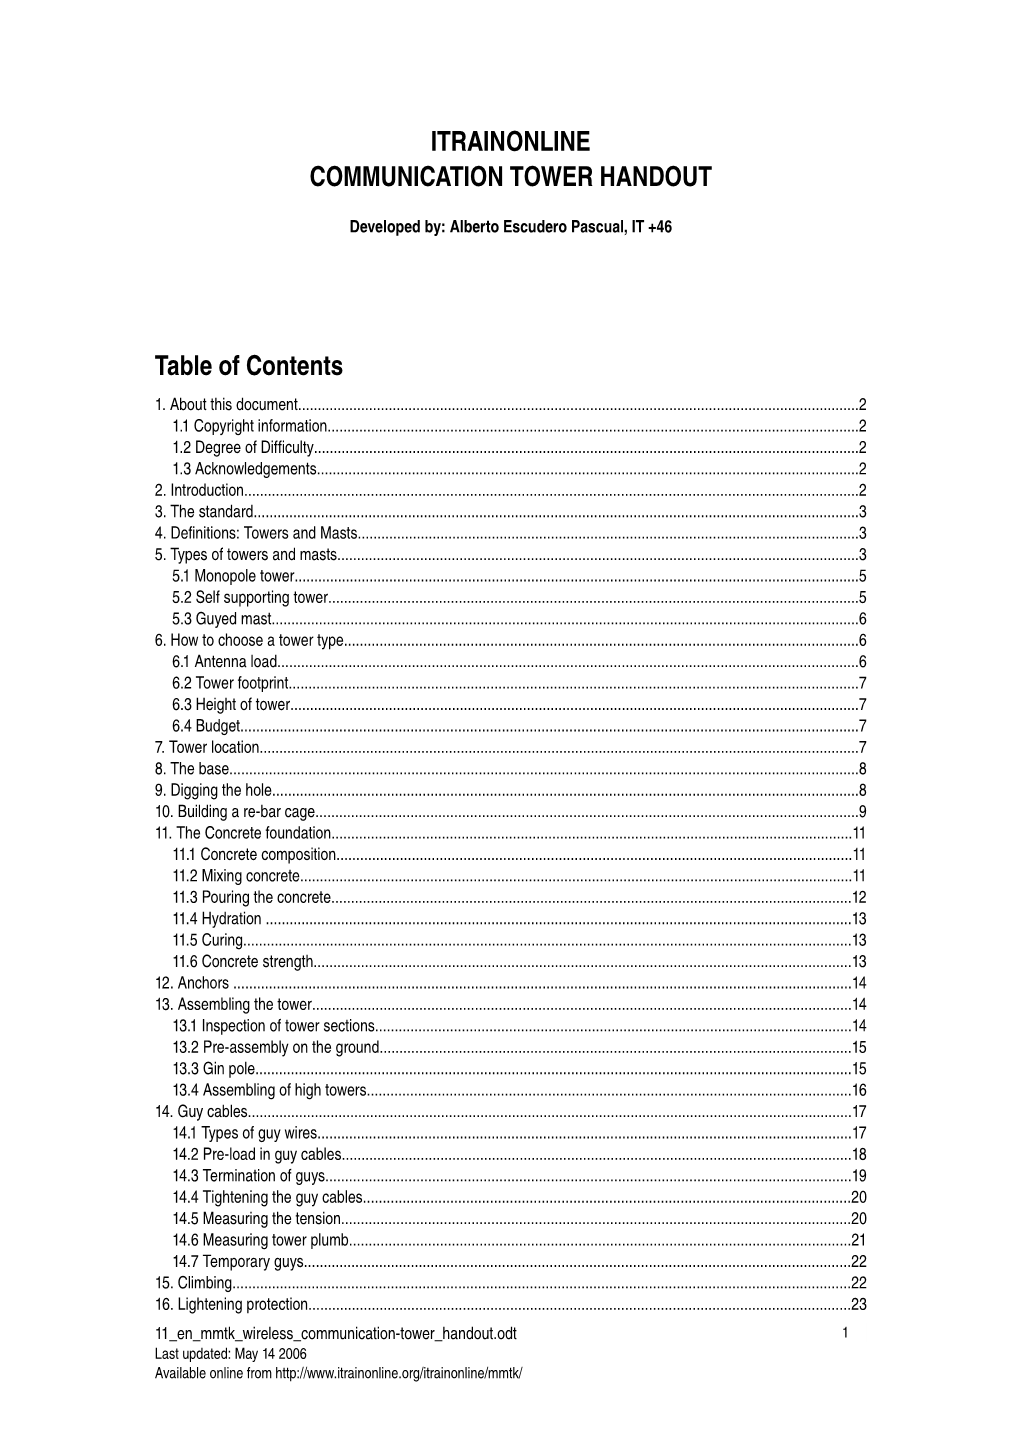 ITRAINONLINE COMMUNICATION TOWER HANDOUT Table of Contents